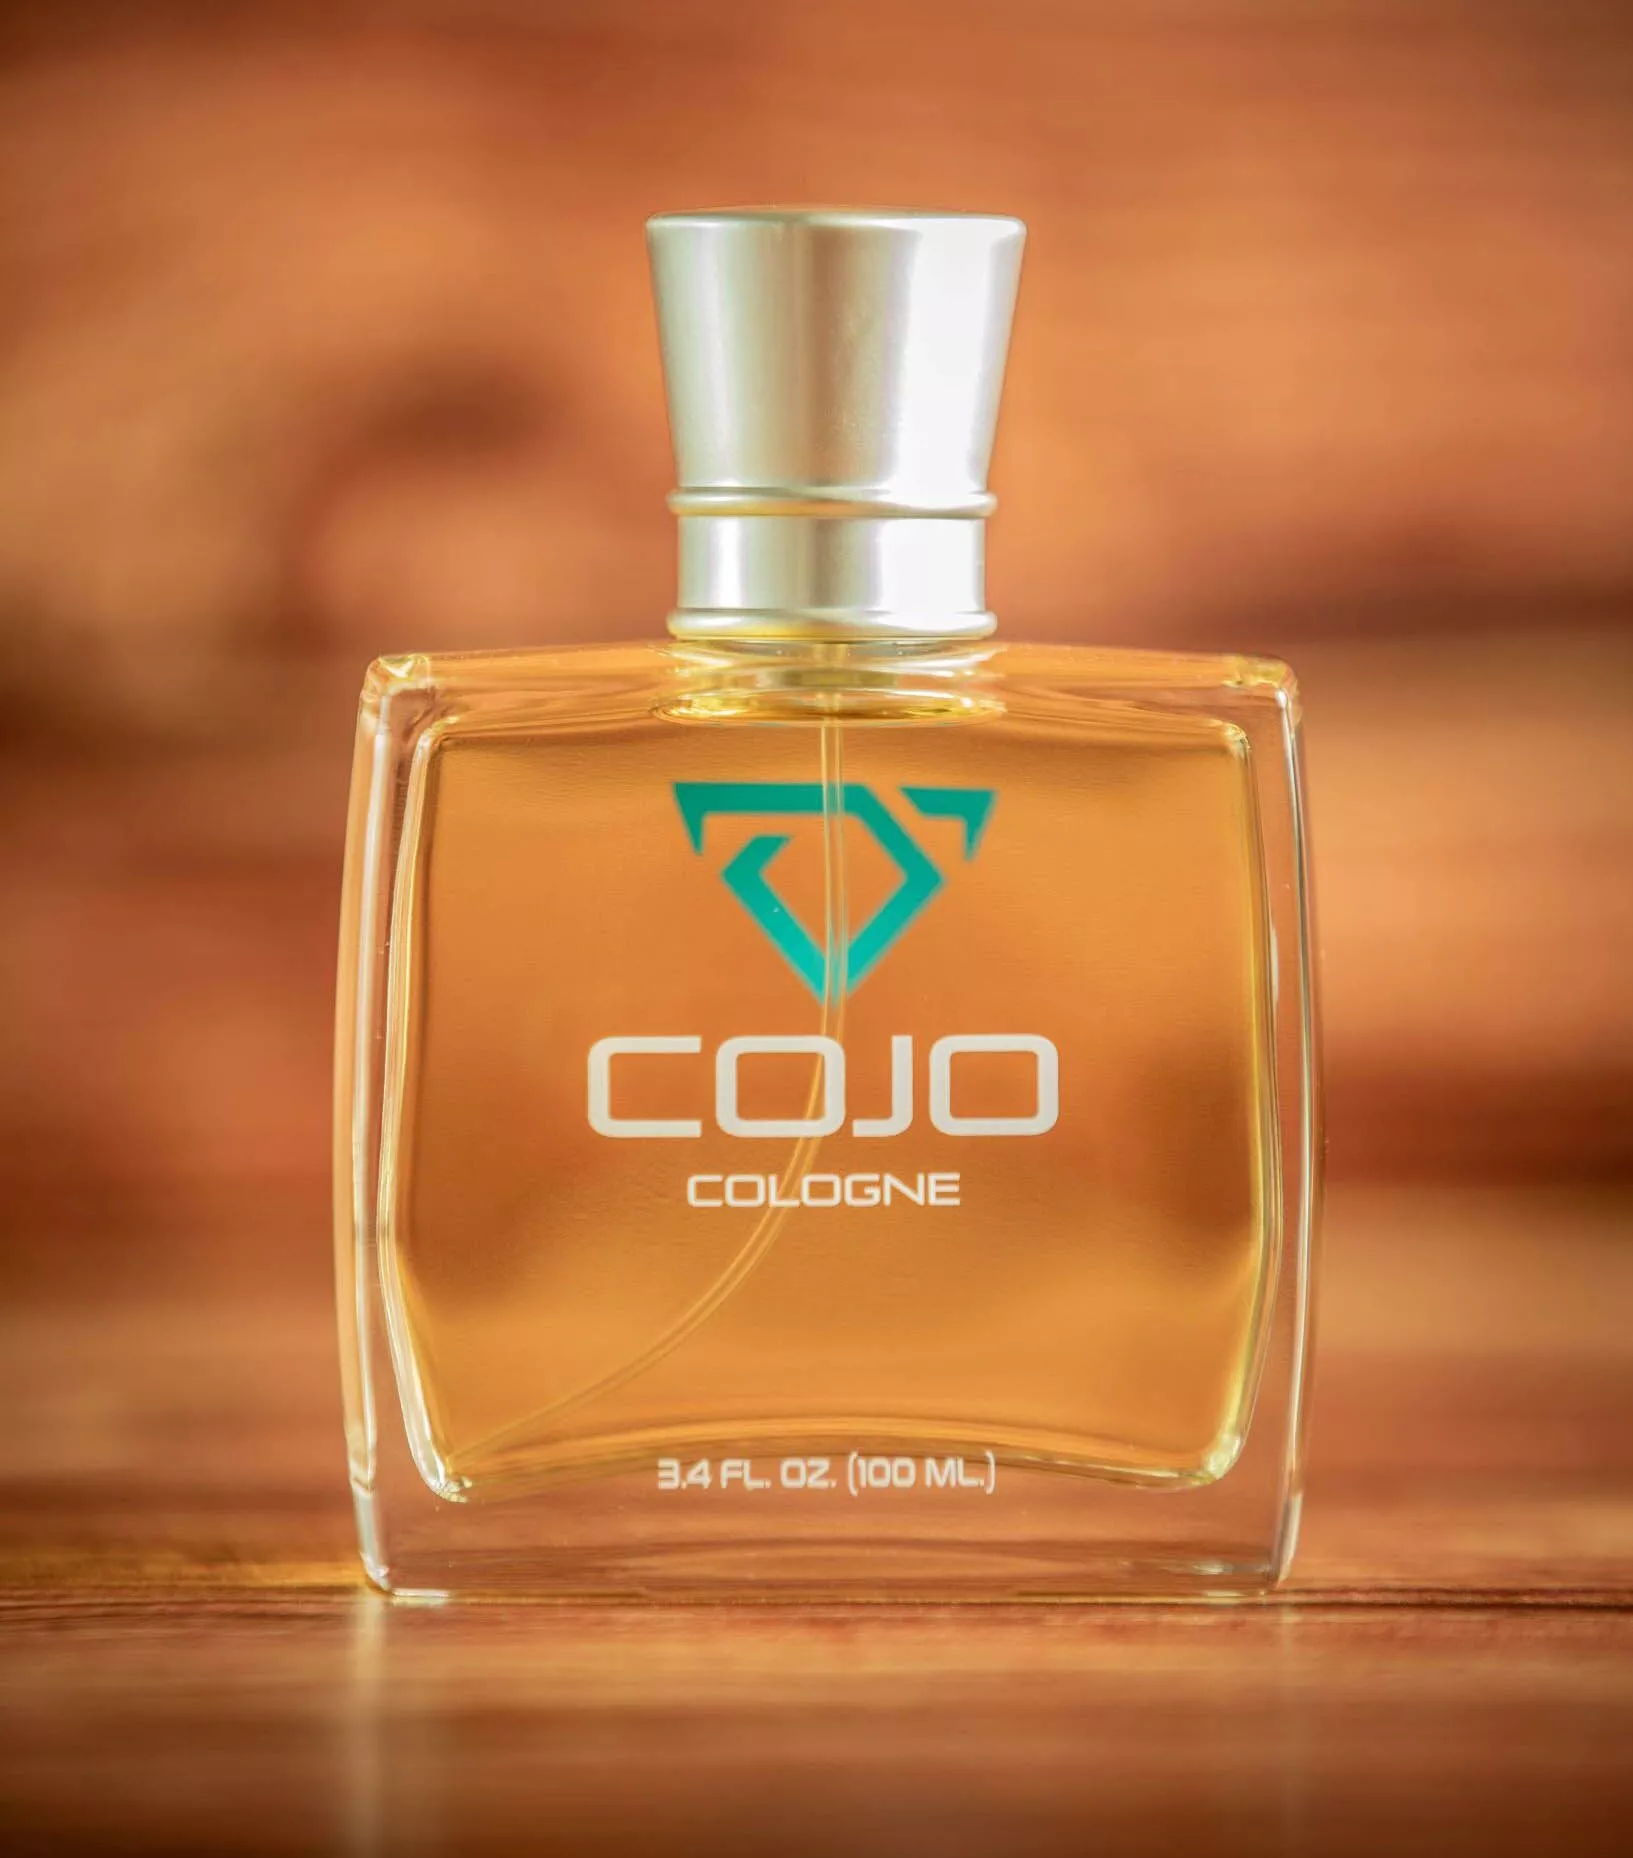 Cinch Cologne - Dually